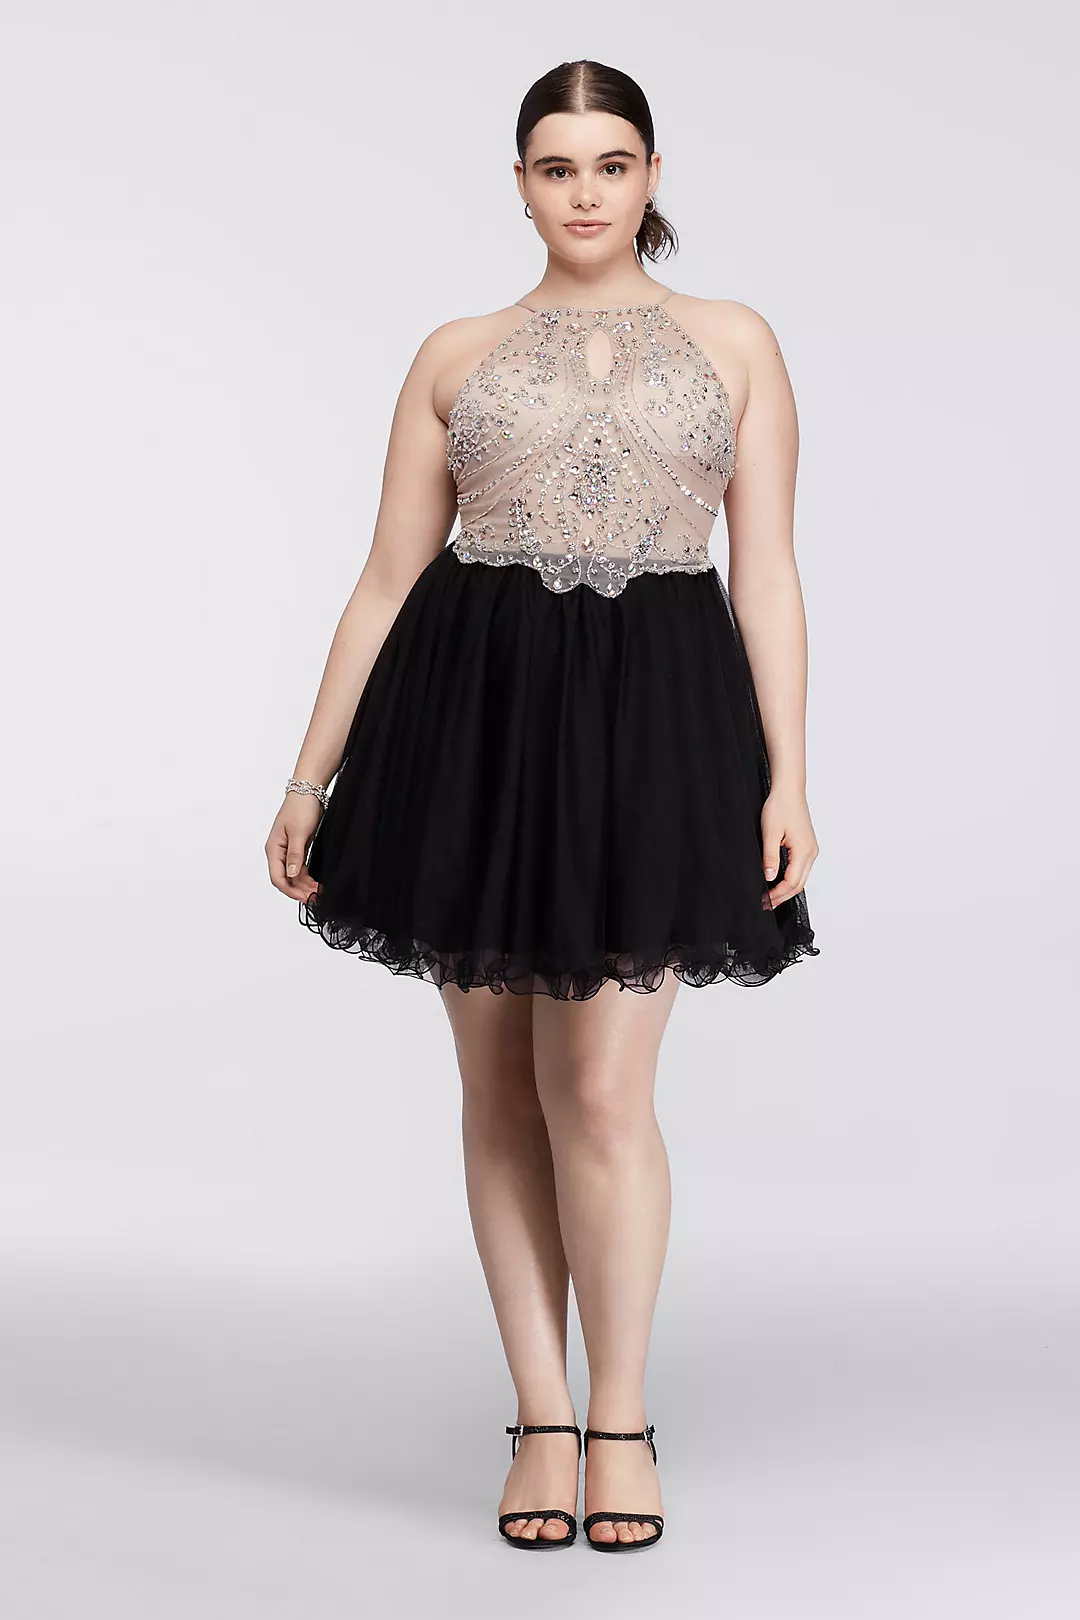 Short Halter Homecoming Dress with Beaded Bodice Image